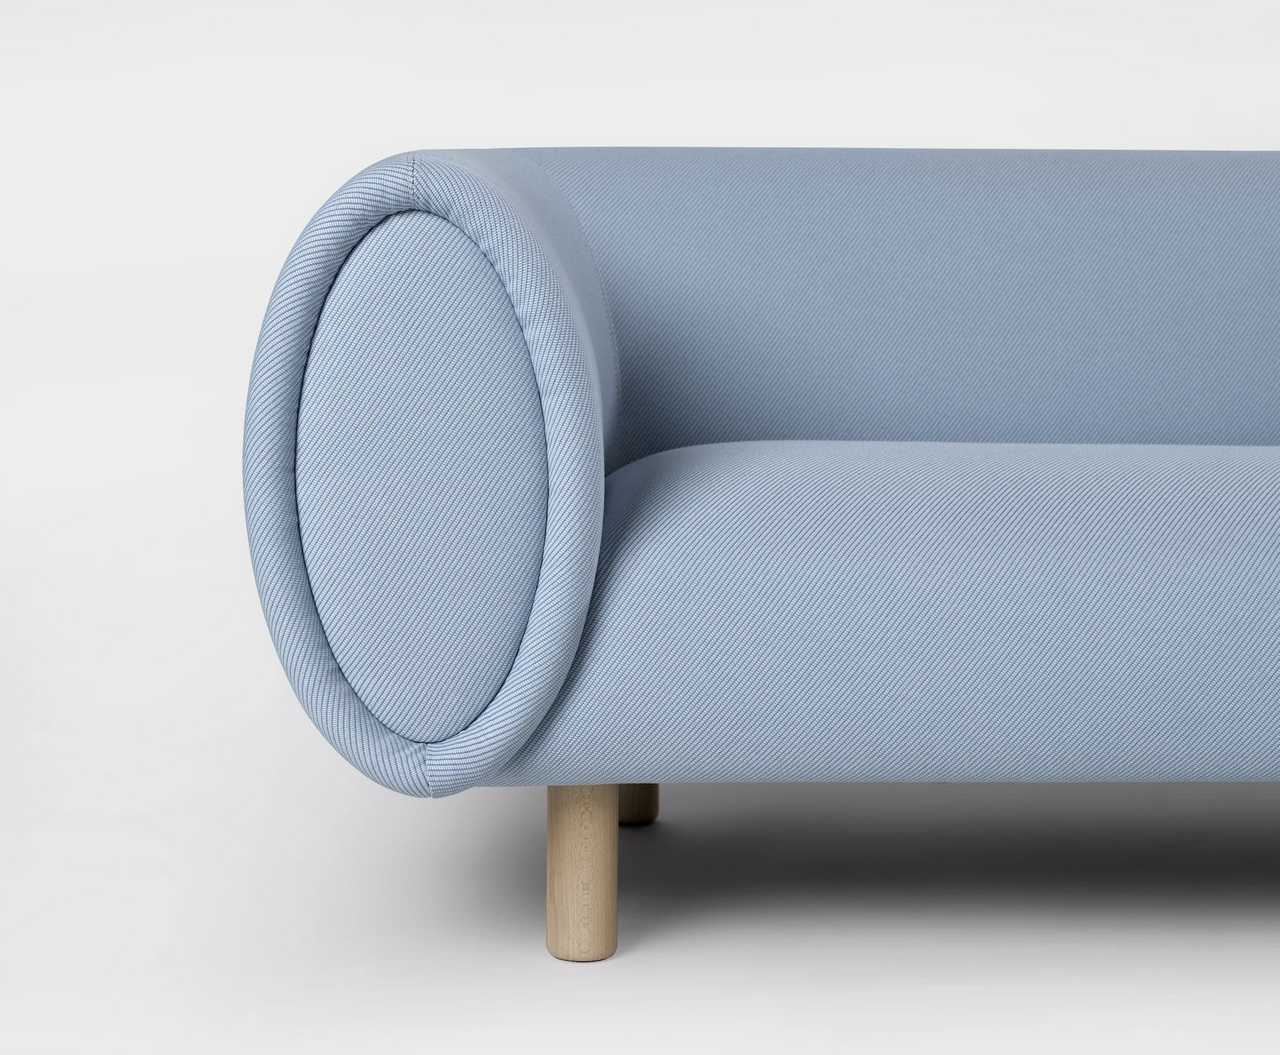 Tobi is a curvy sofa design by Rexite that portrays Timeless Elegance